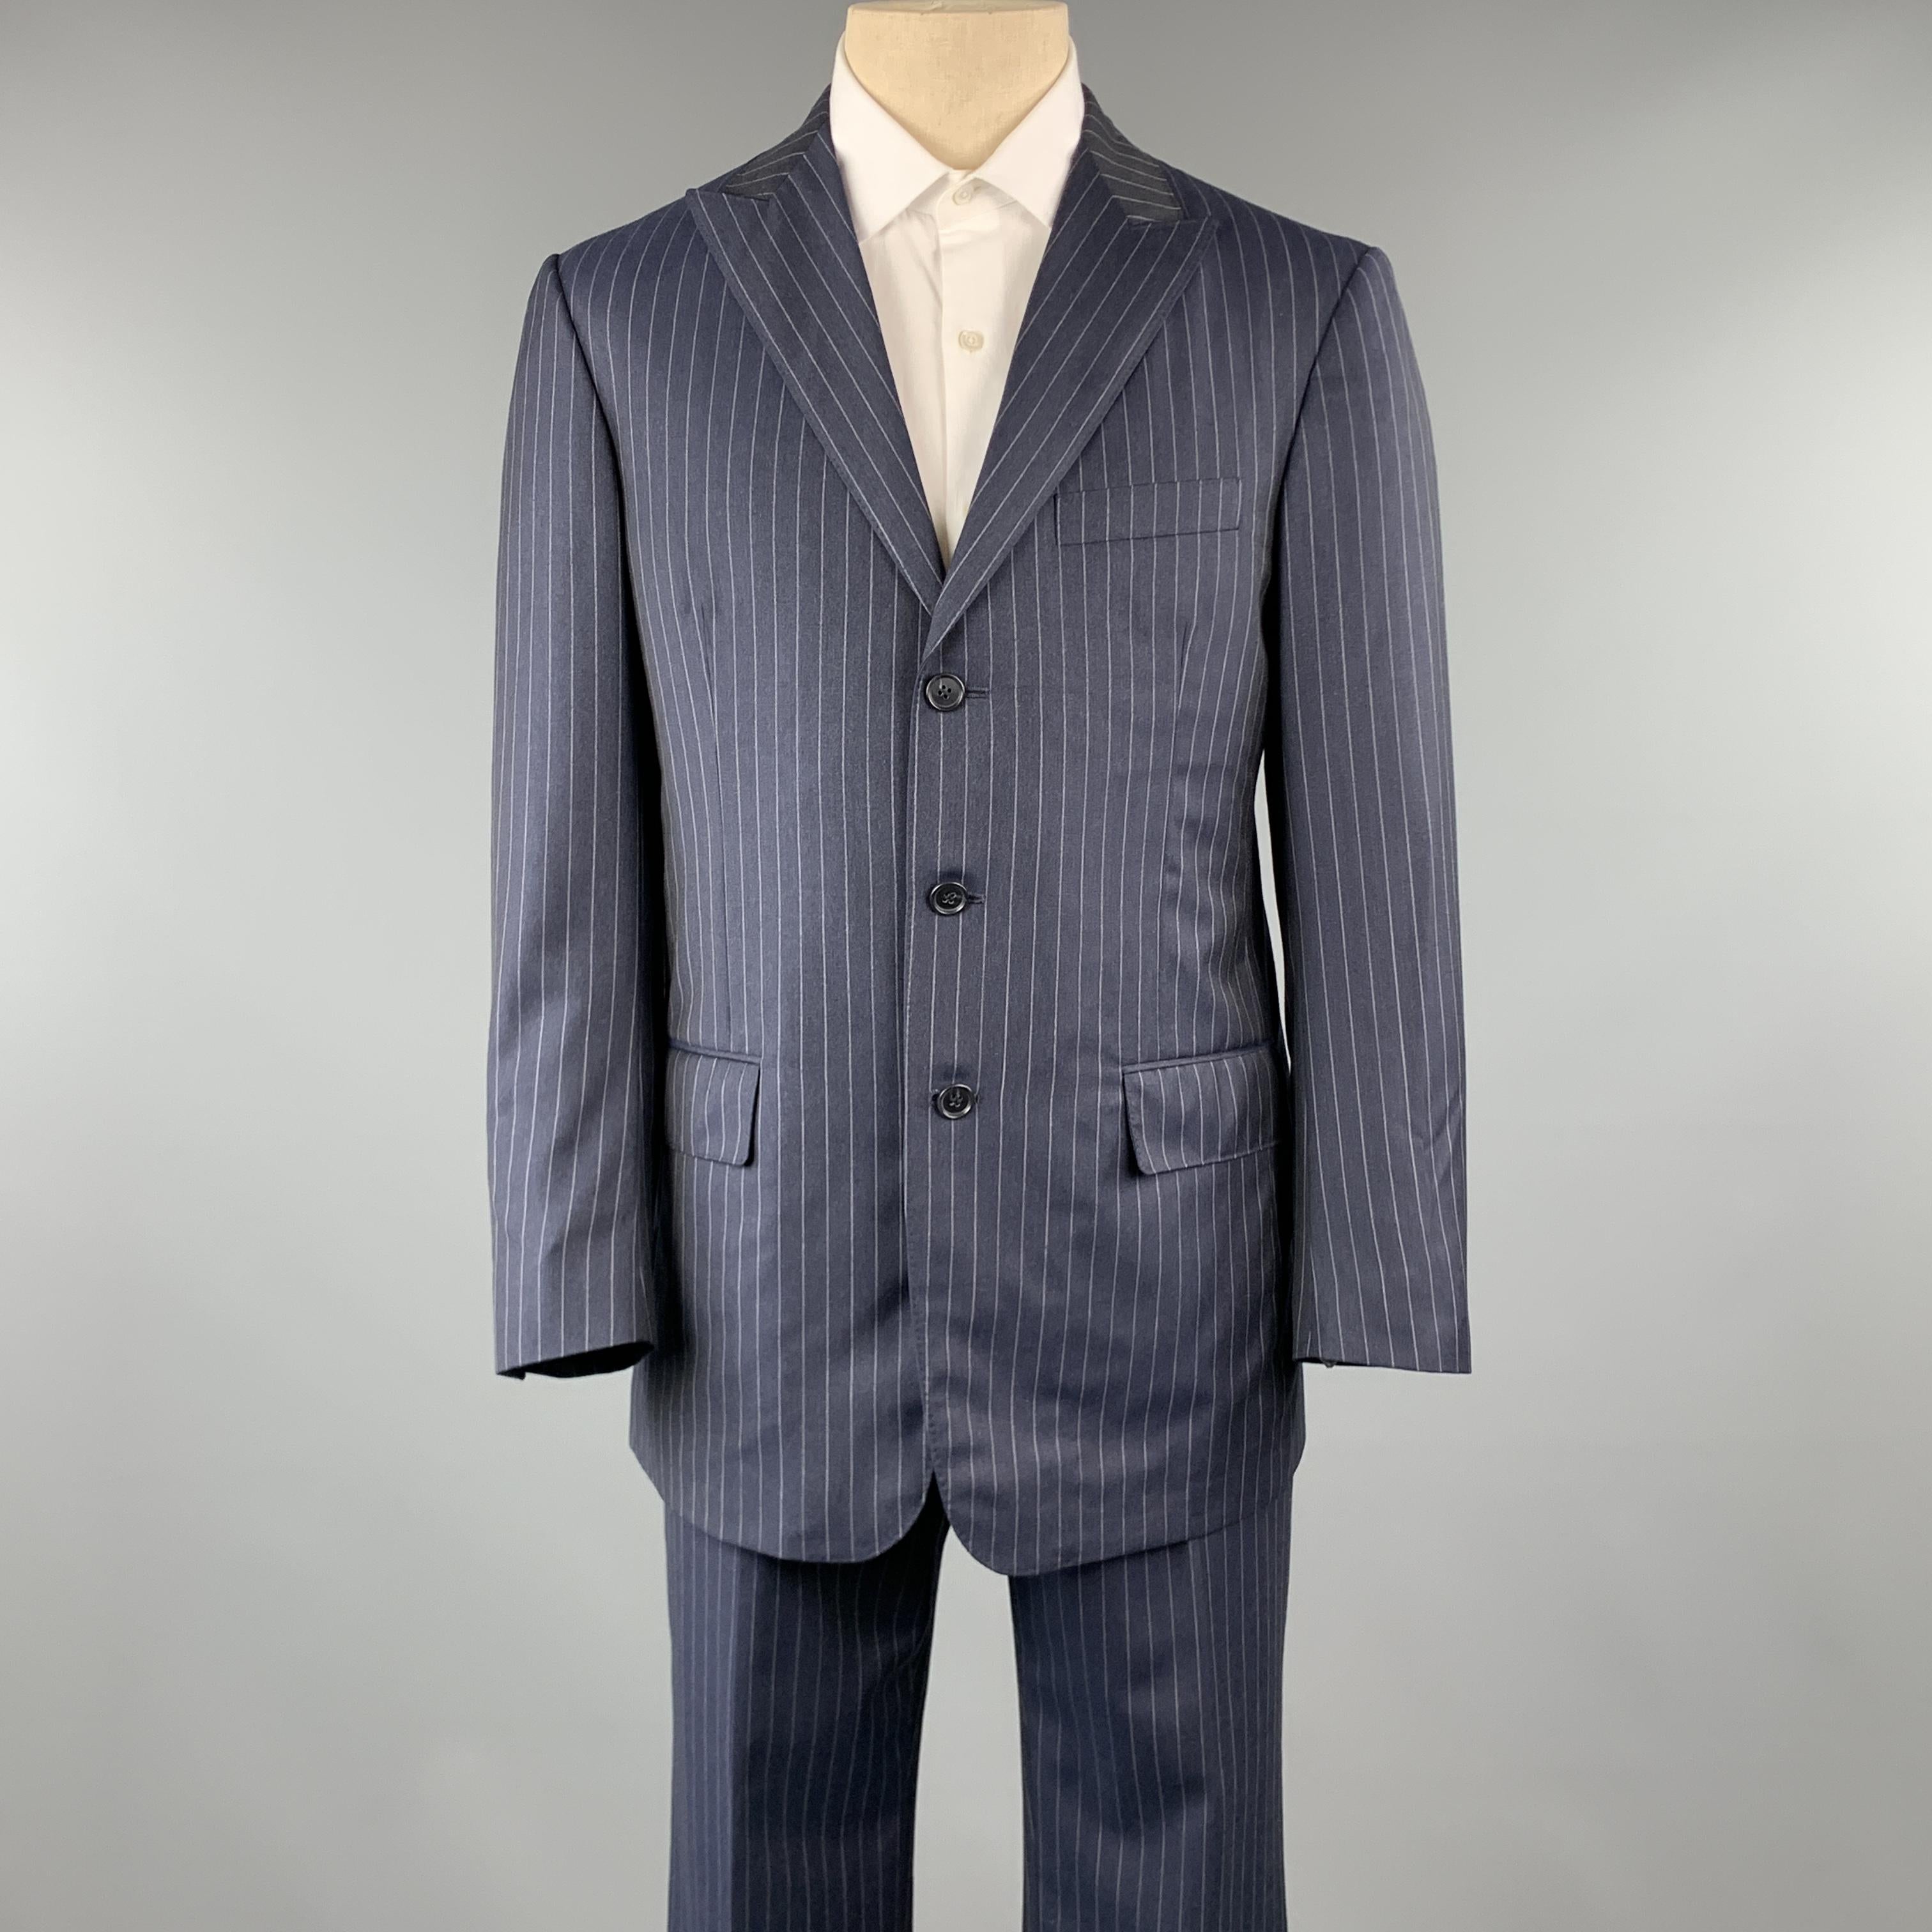 DAVID AUGUST suit comes in a navy & gray striped wool and includes a single breasted, three button sport coat with peak lapel and matching front trousers. Made in USA.

Pre-Owned Condition.
Marked: ( No Size Marked